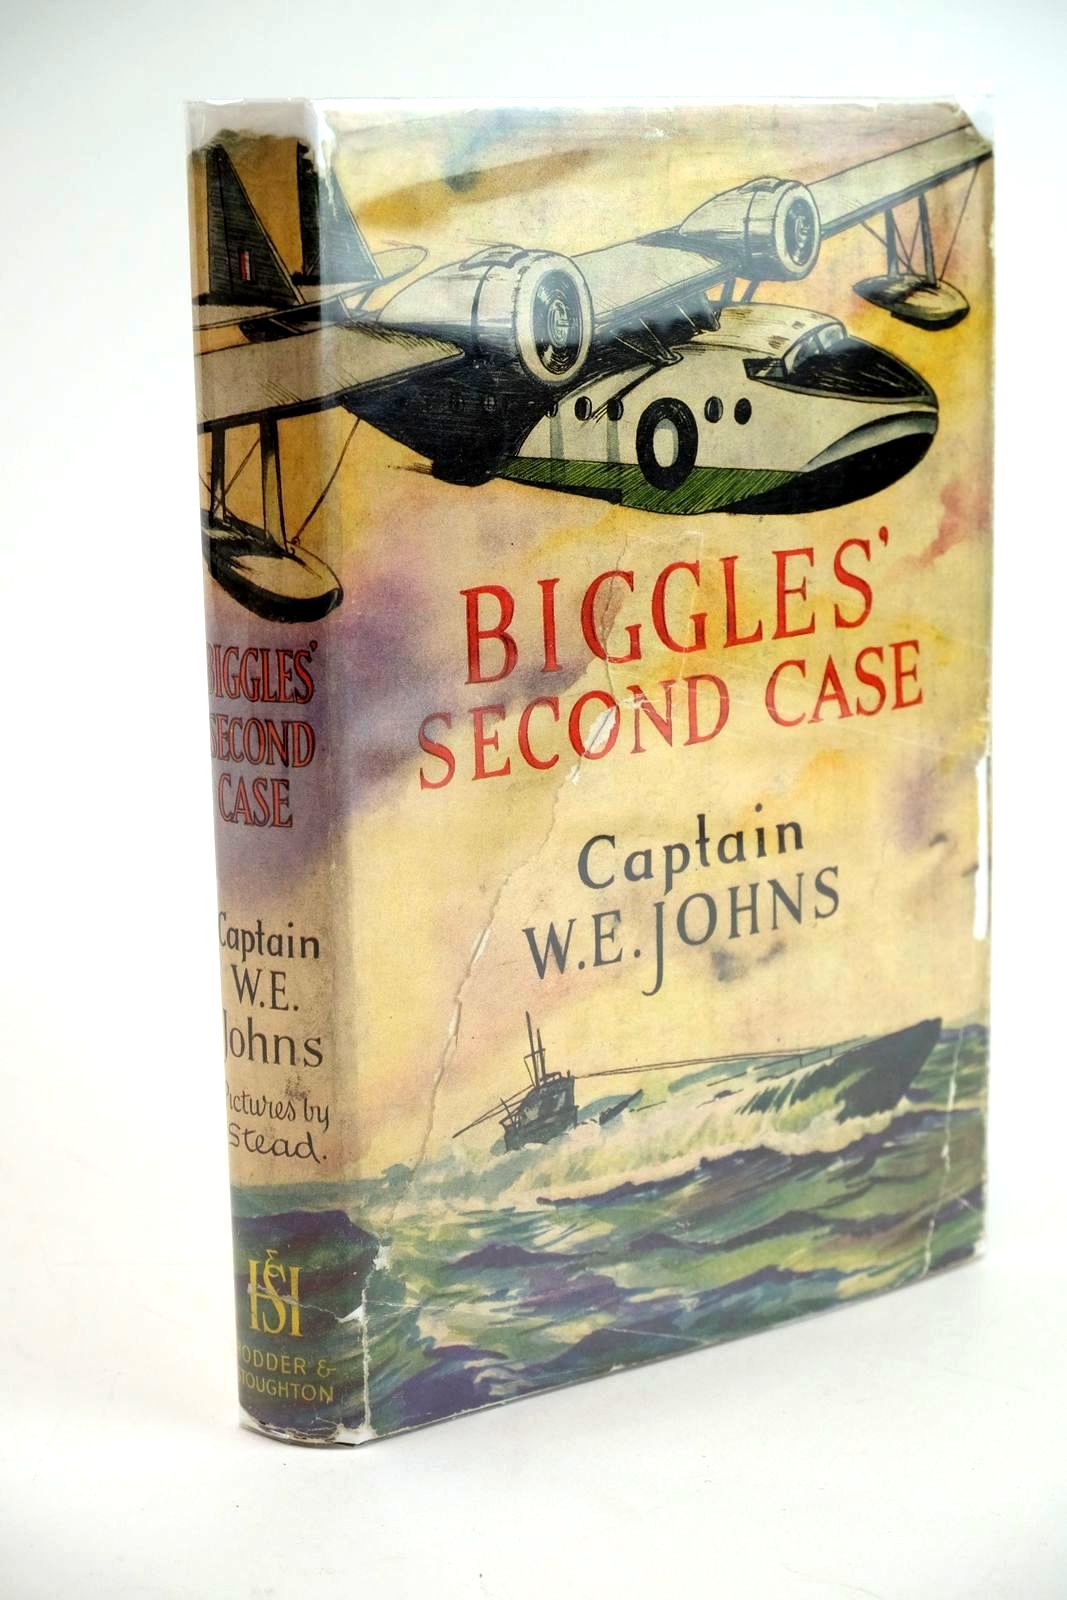 Photo of BIGGLES' SECOND CASE written by Johns, W.E. illustrated by Stead,  published by Hodder & Stoughton (STOCK CODE: 1323405)  for sale by Stella & Rose's Books